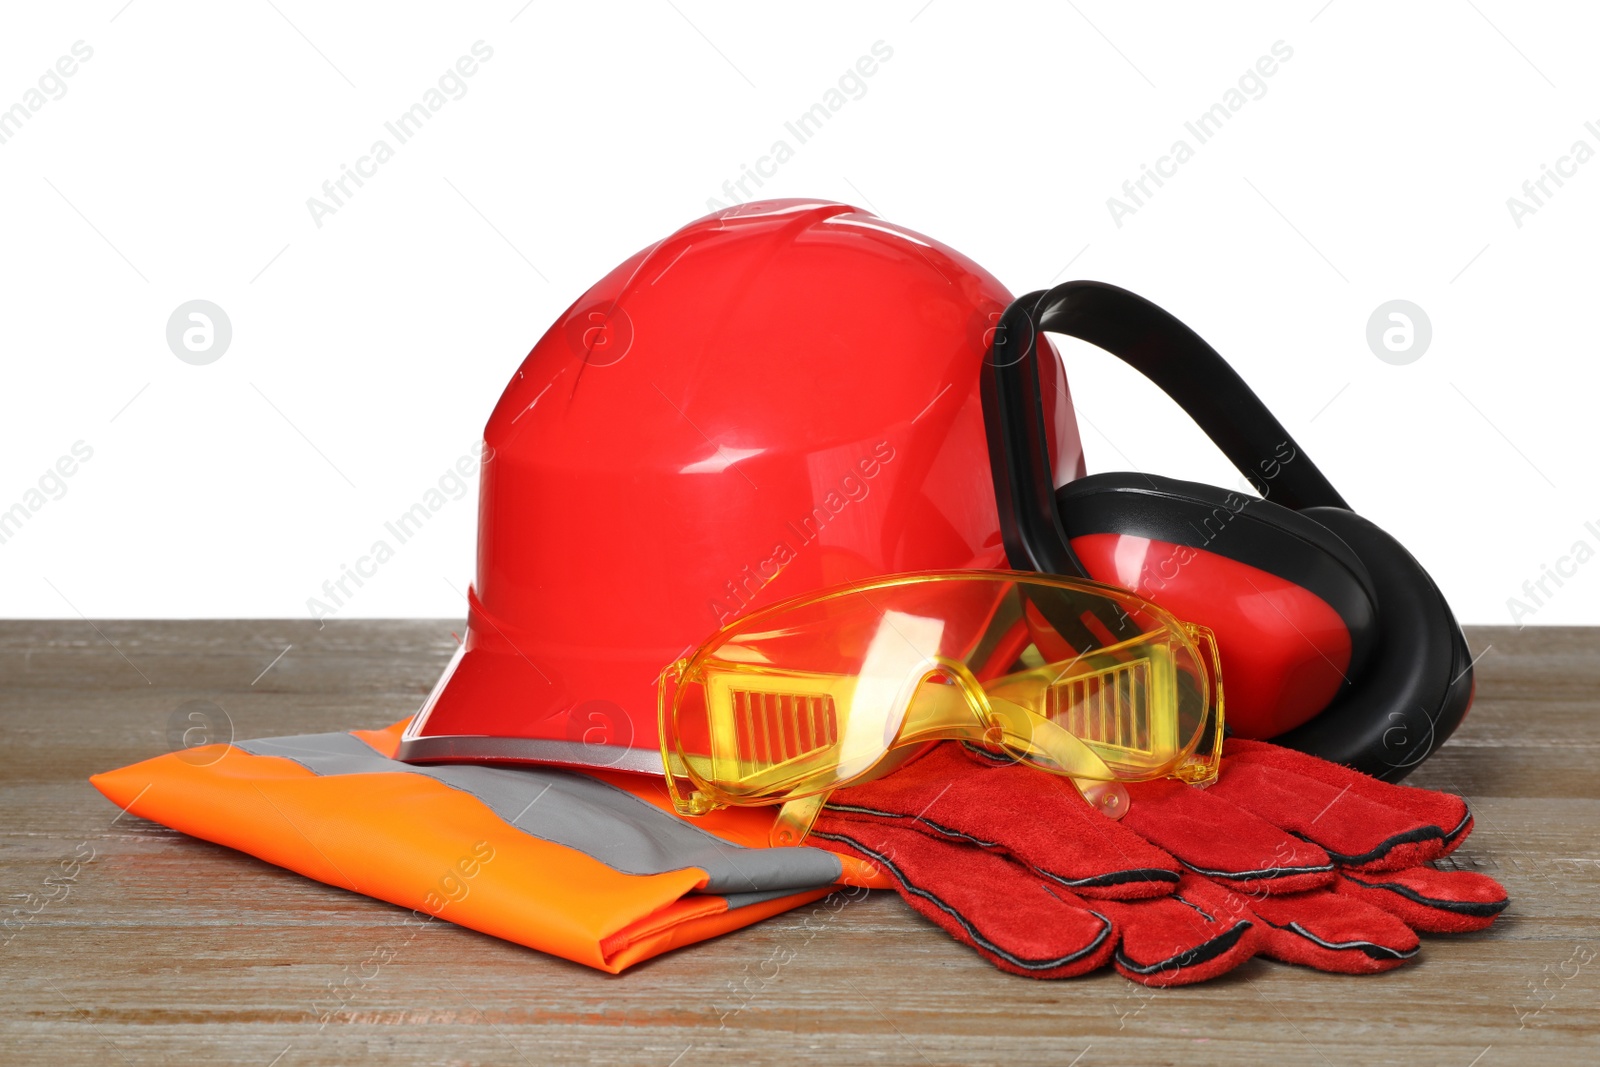 Photo of Personal protective equipment on wooden surface against white background